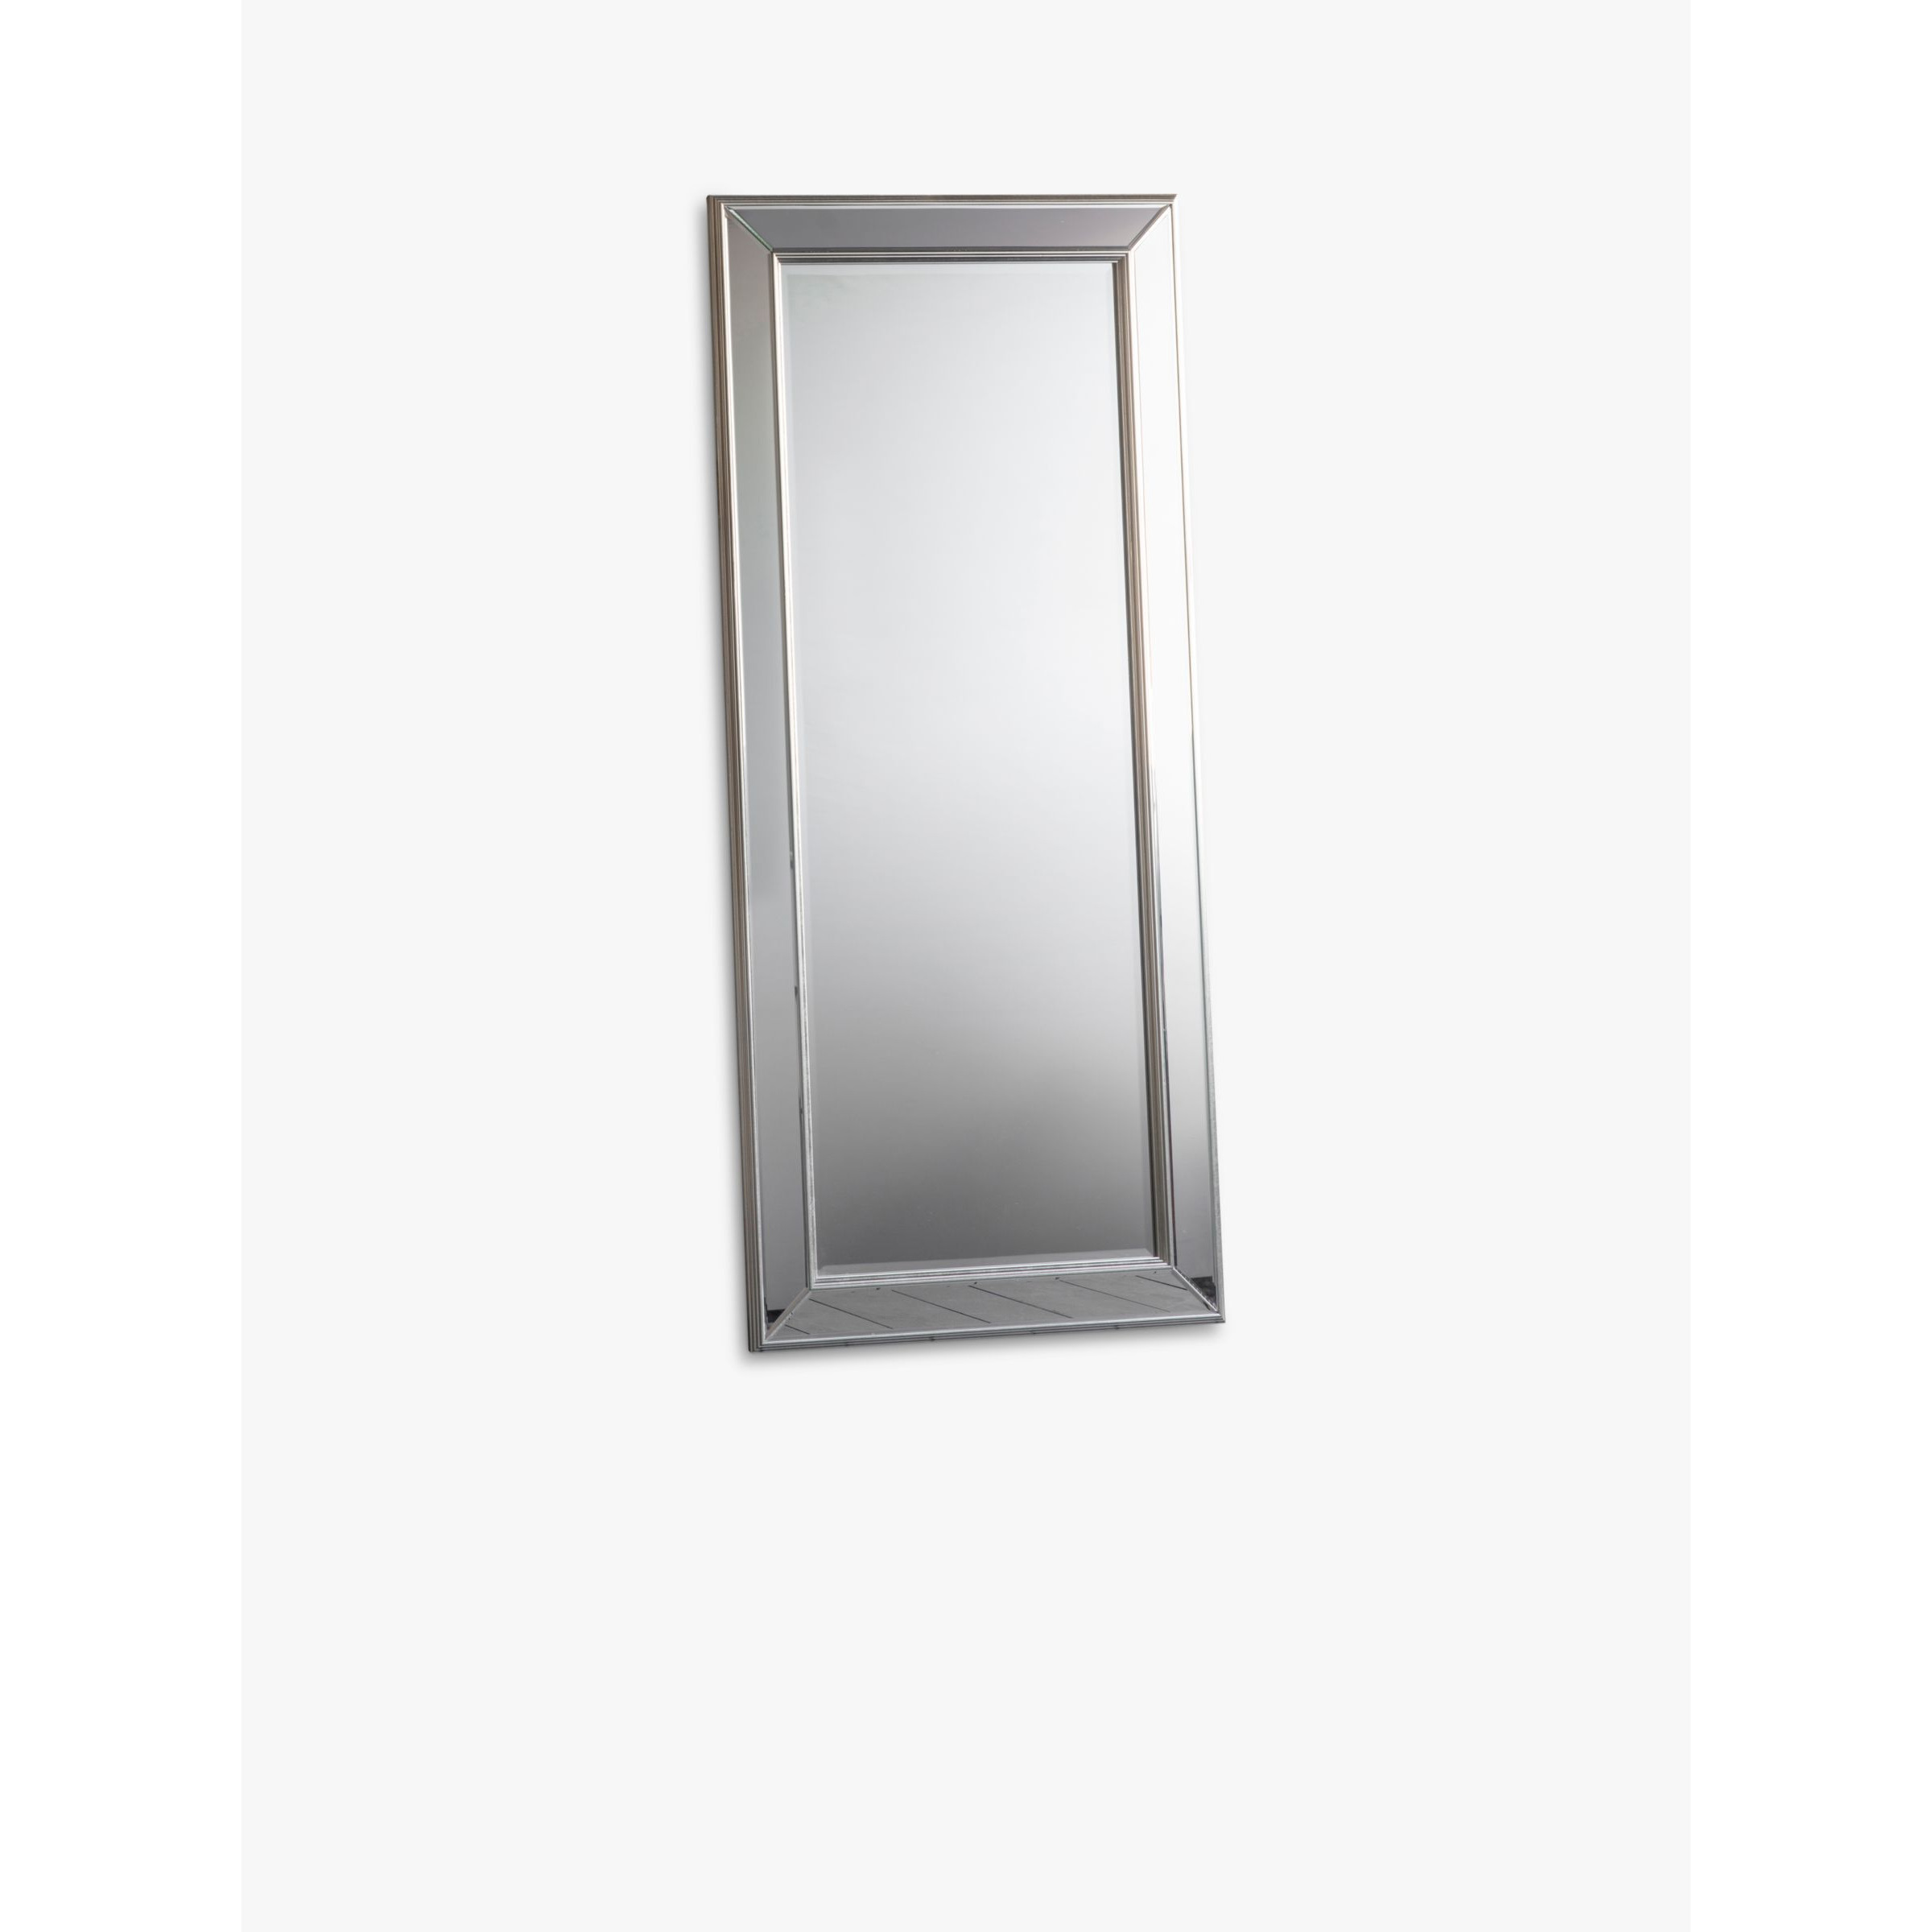 Gallery Direct Farrell Rectangular Leaner / Wall Mirror, 157 x 68.5cm, Champagne - image 1